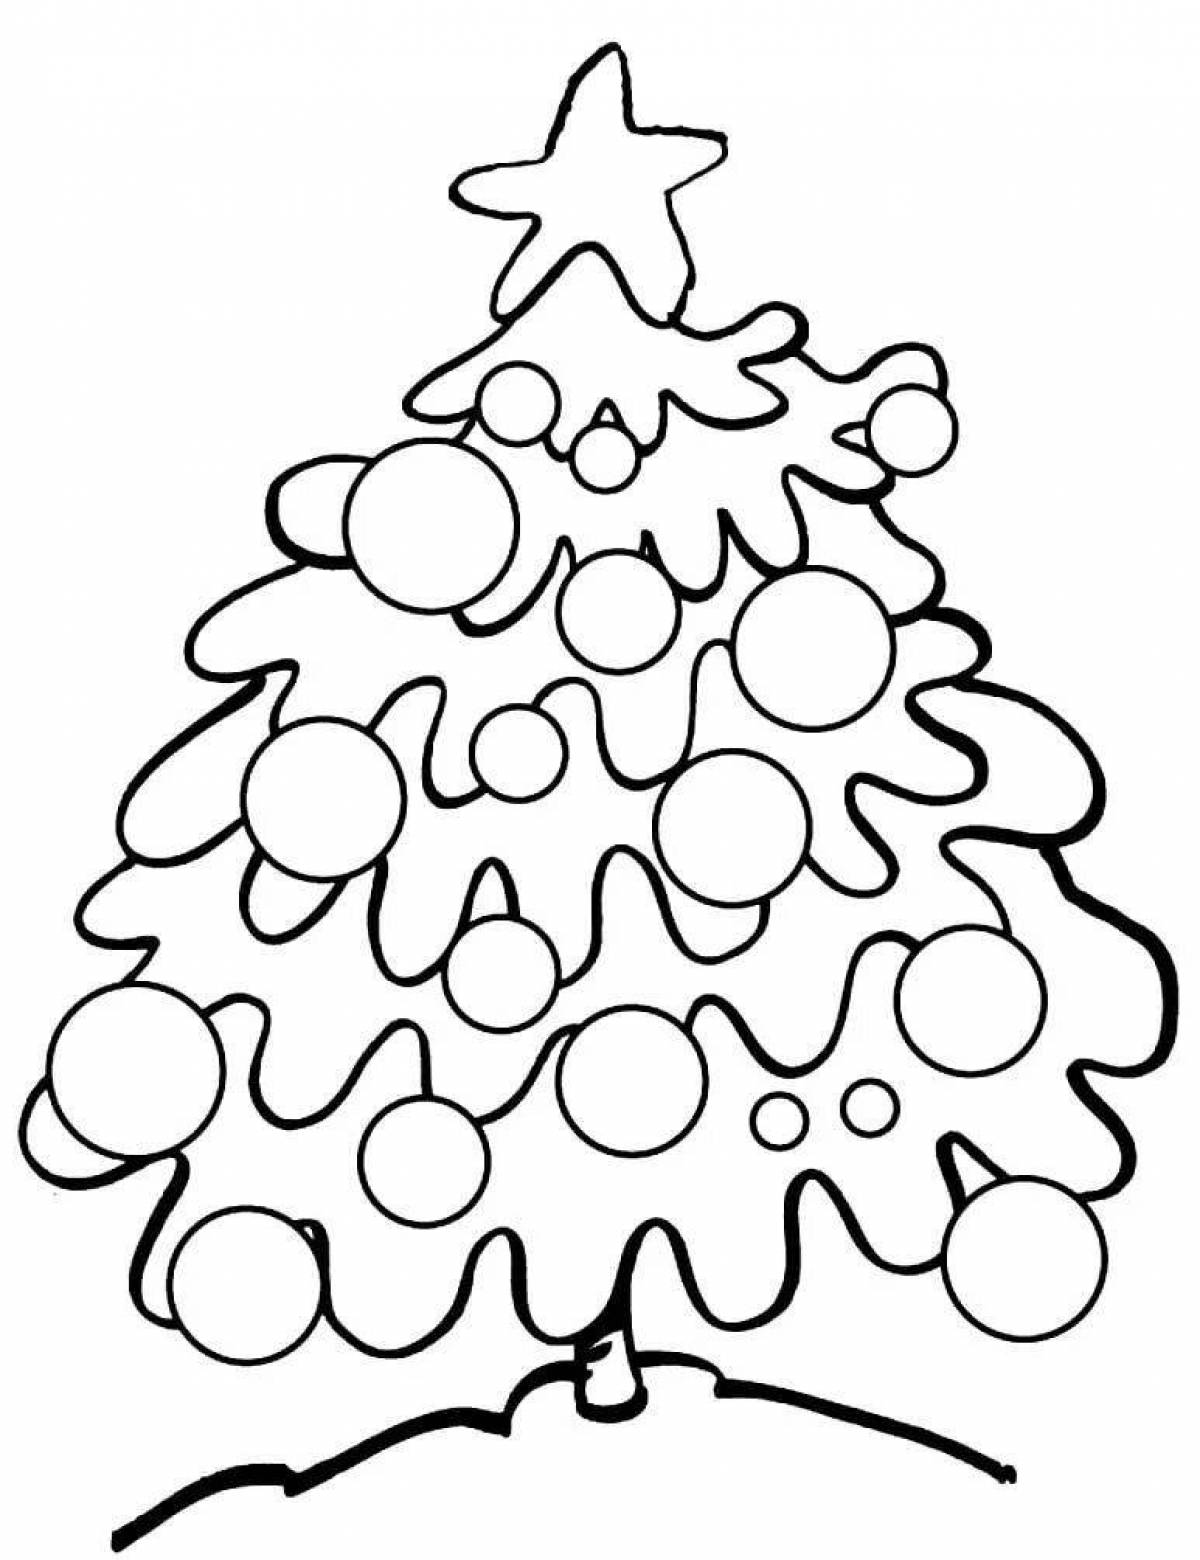 Gorgeous Christmas tree coloring book for kids